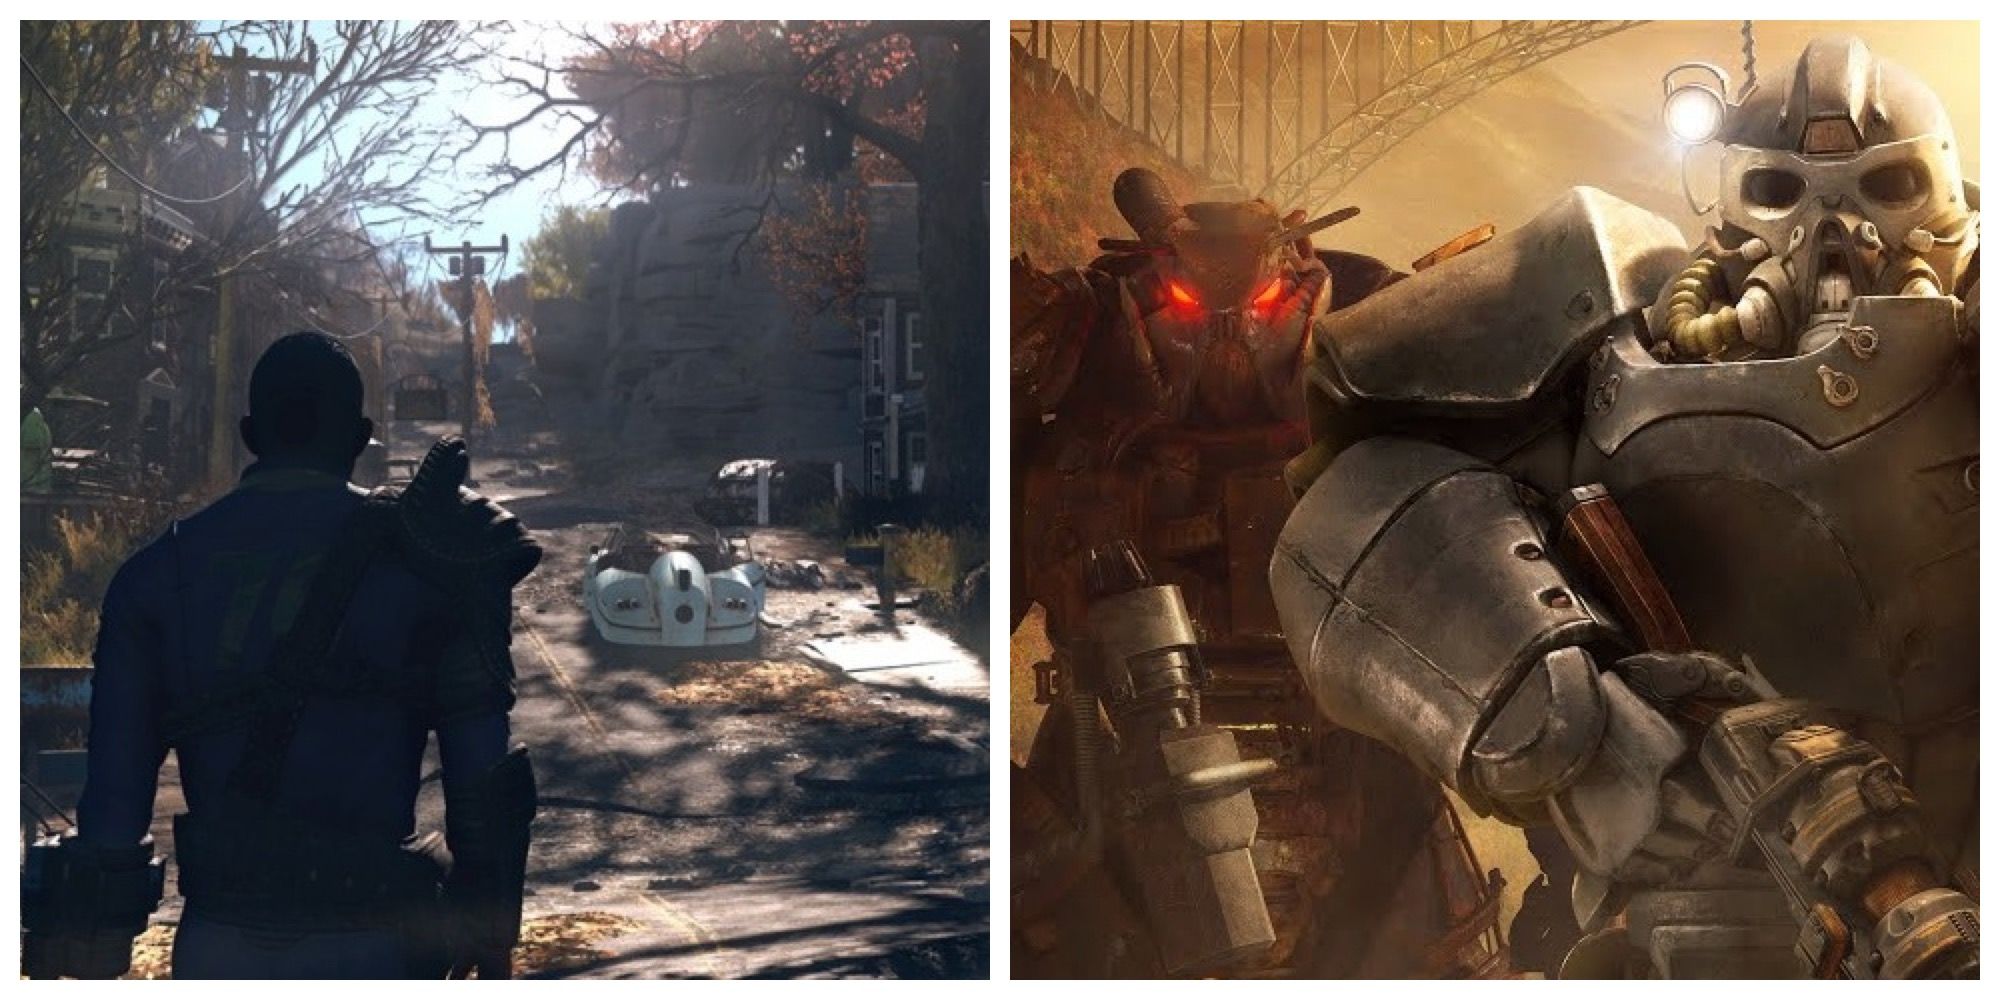 Fallout 76 split image new player roaming wasteland and two experienced players in power armor